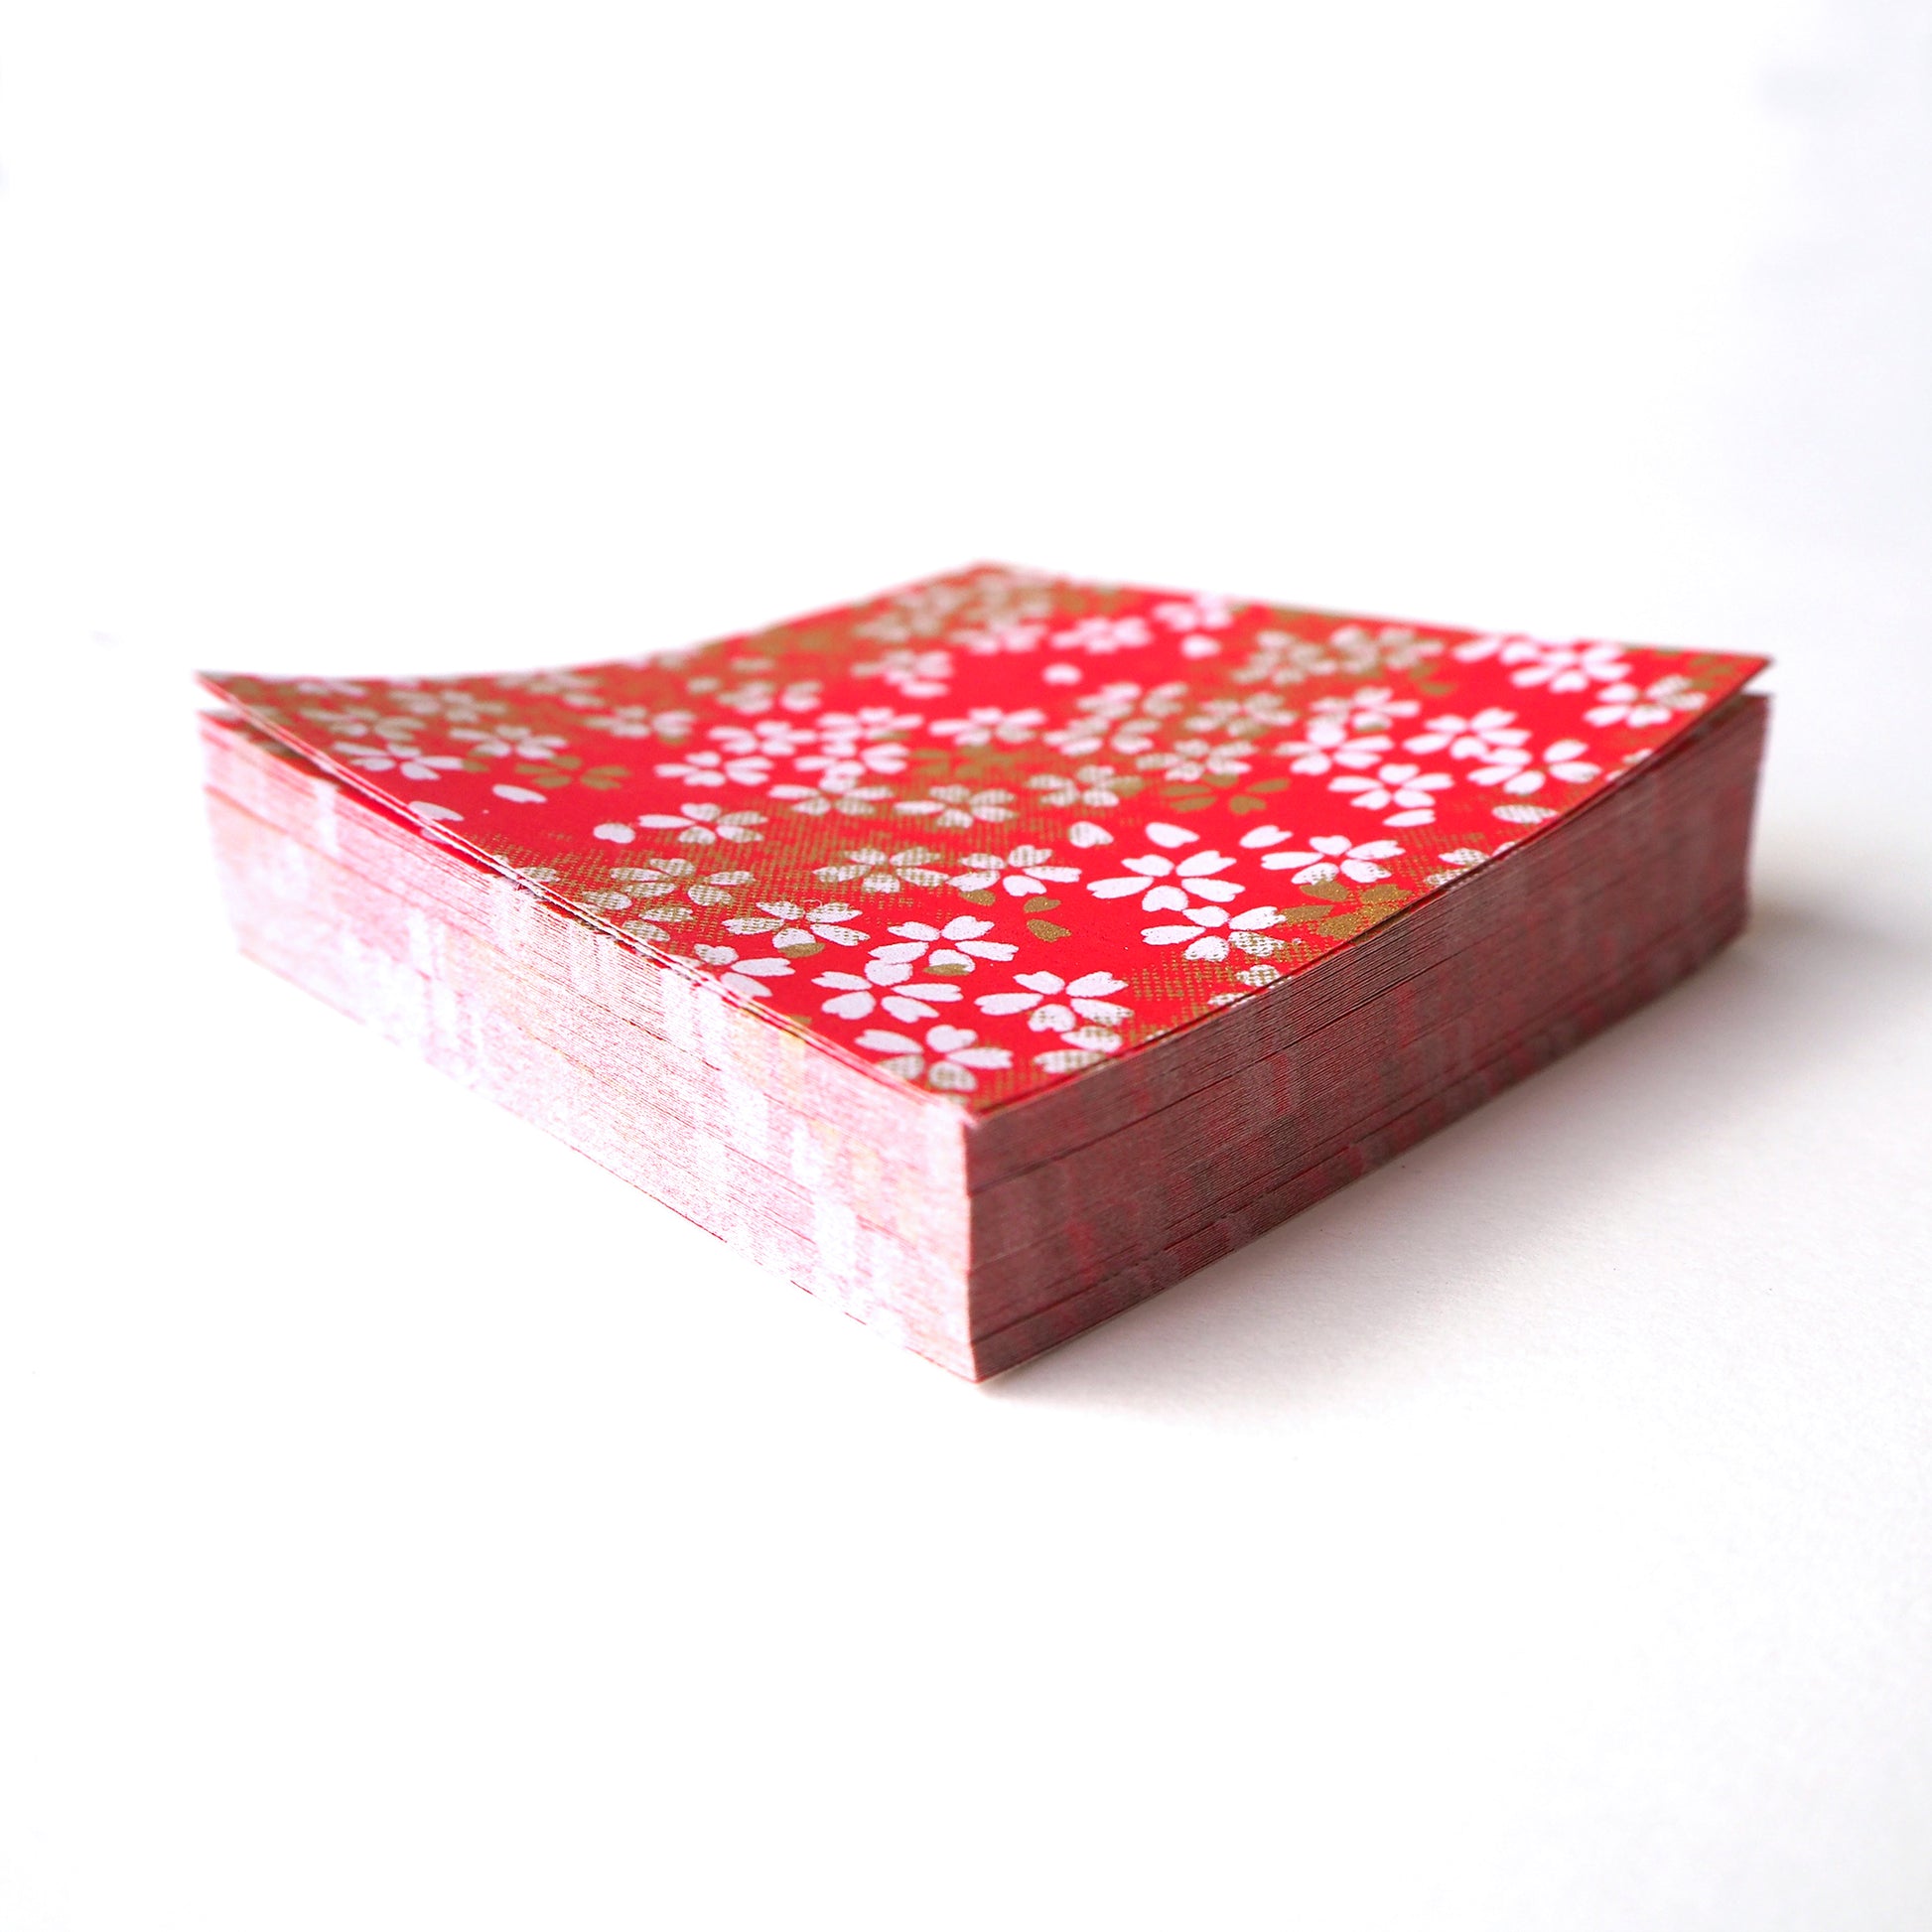 Pack of 100 Sheets 7x7cm Yuzen Washi Origami Paper HZ-063 - Cherry Blossom Red - washi paper - Lavender Home London